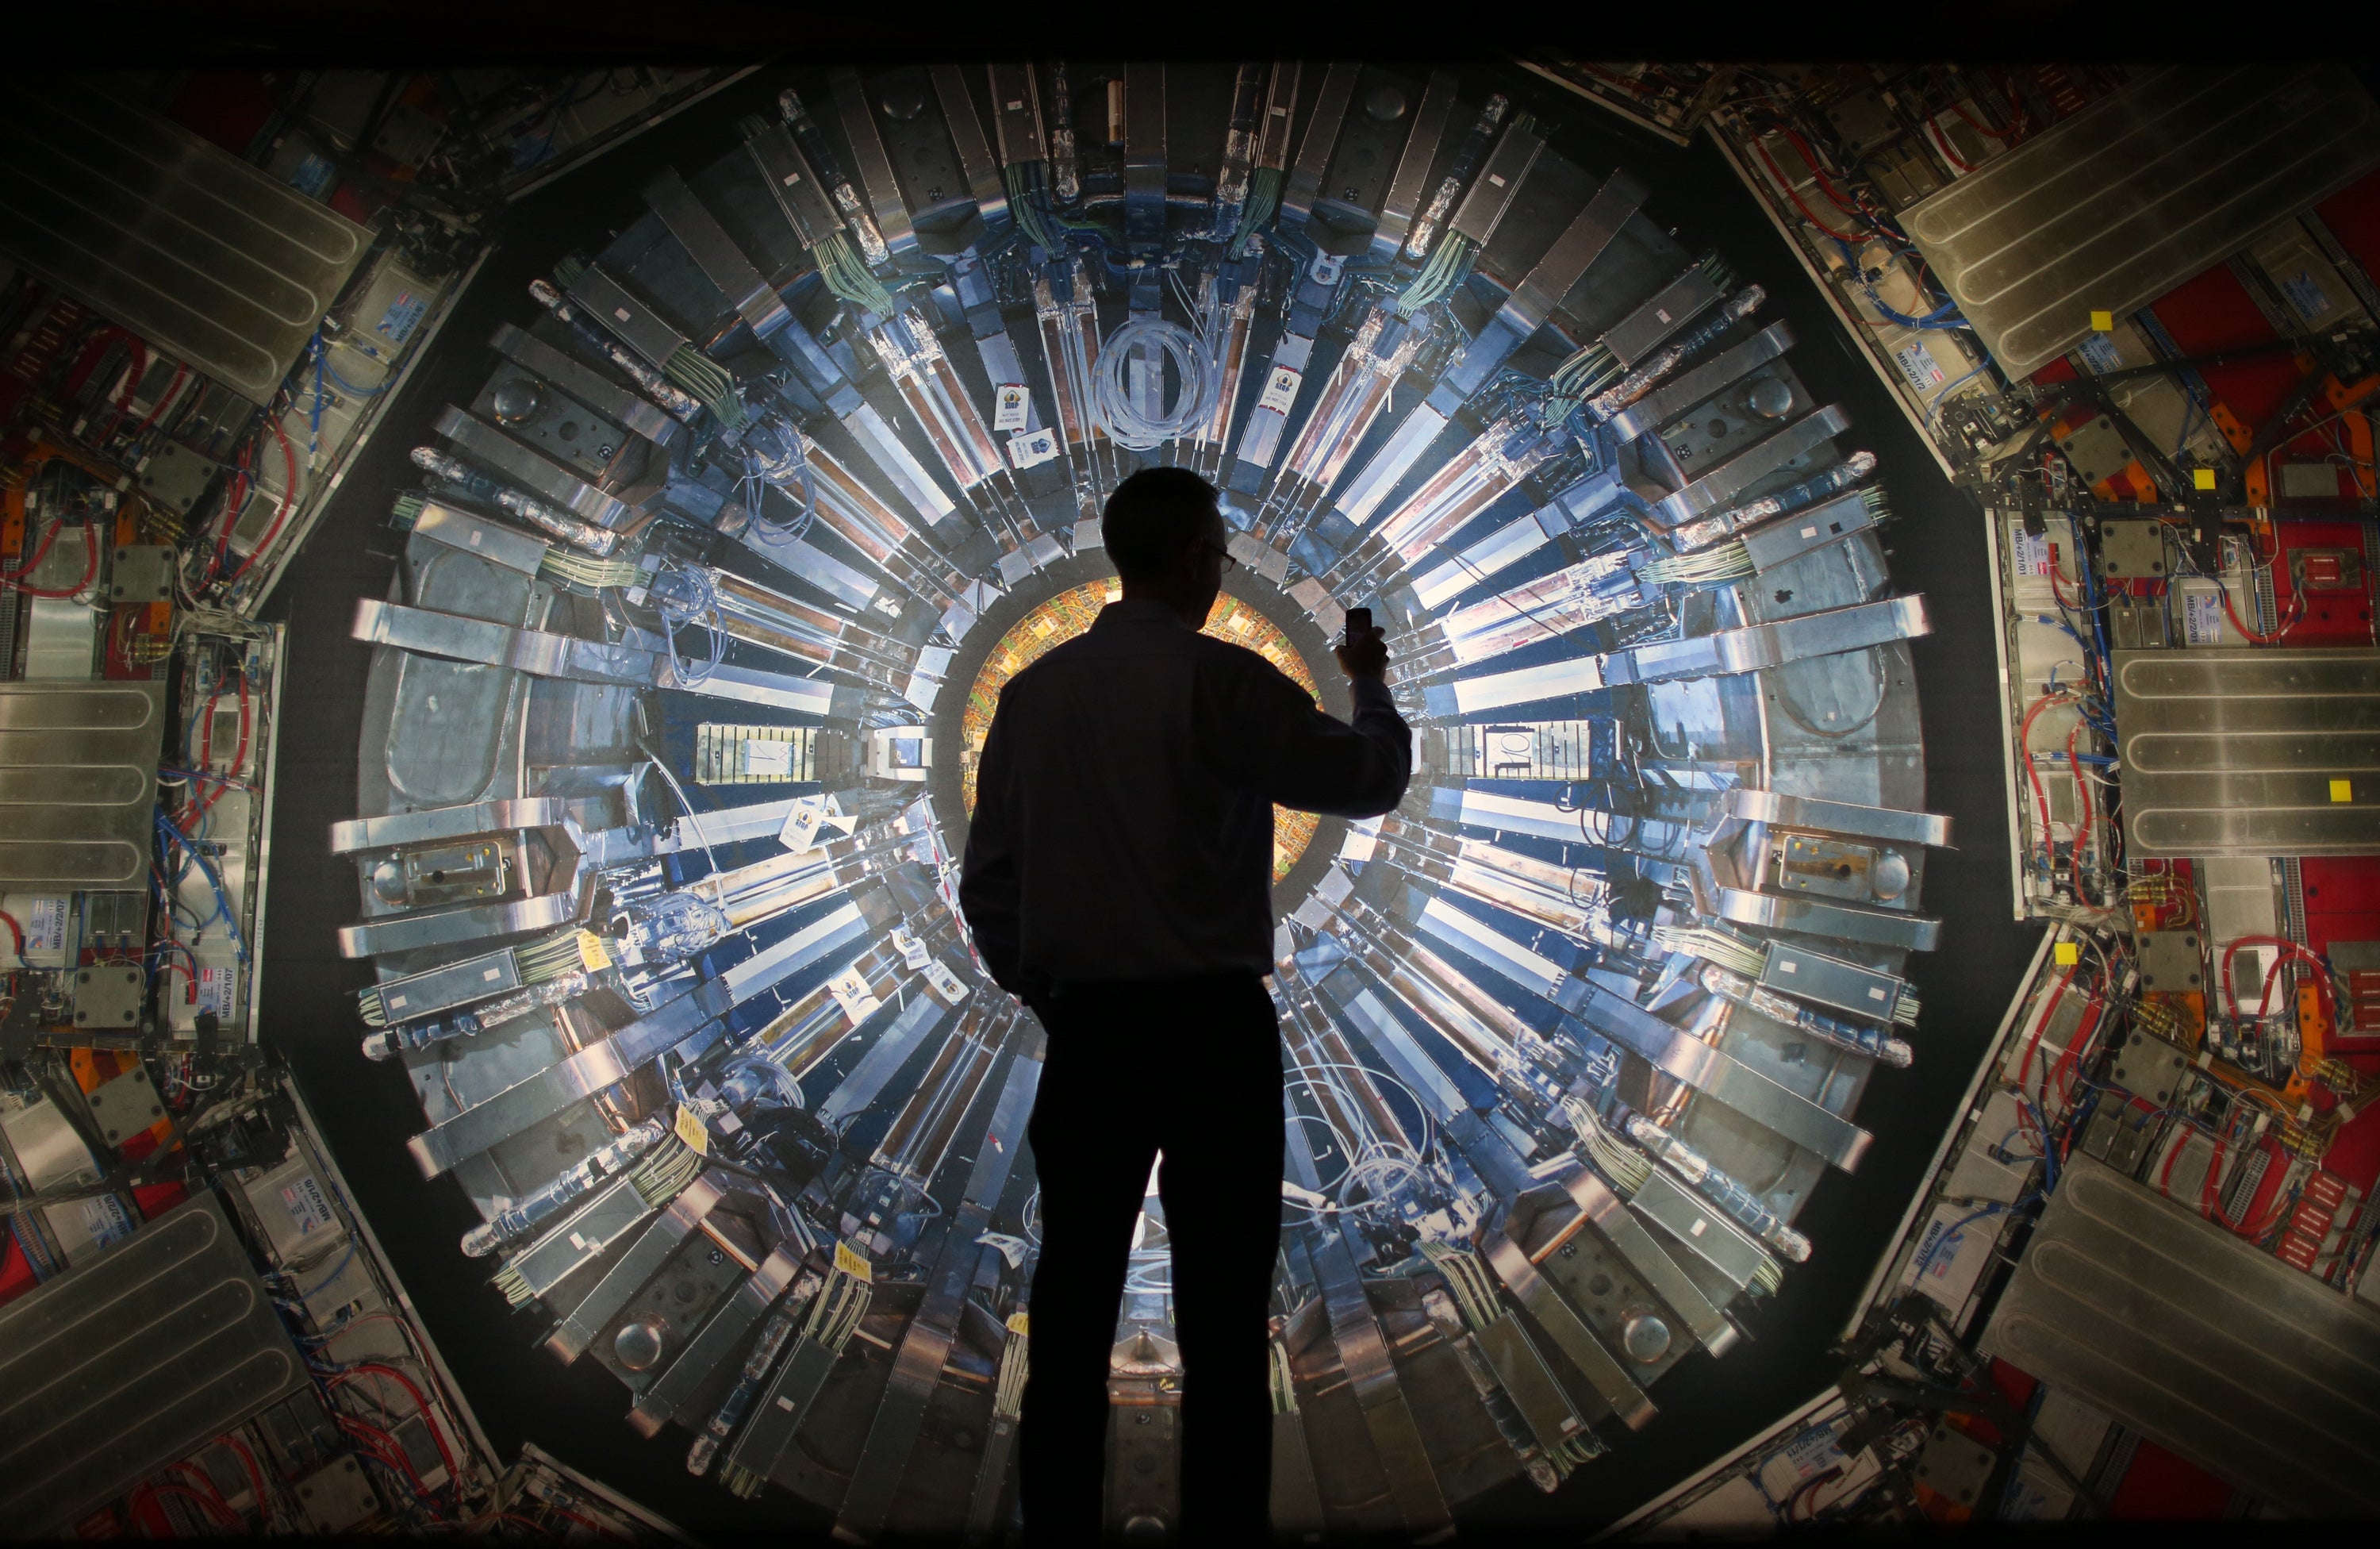 A visitor takes a photograph of a large image of the Large Hadron Collider at the London Science Museum